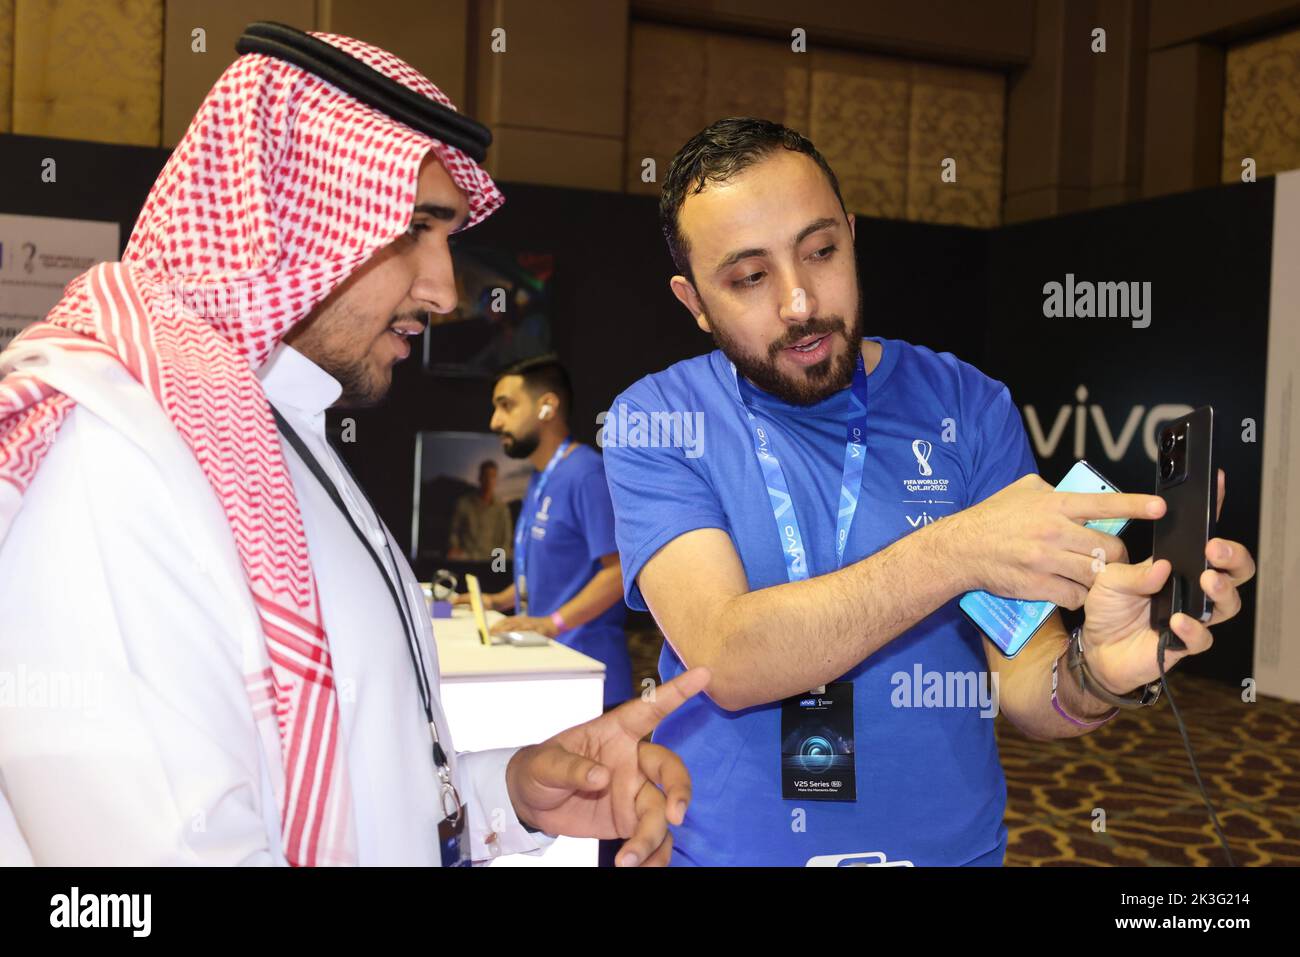 Riyadh, Saudi Arabia. 26th Sep, 2022. A staff member introduces a new smartphone to a visitor during a launch of Vivo's new products in Riyadh, Saudi Arabia, on Sept. 26, 2022. Chinese phone maker Vivo unveiled on Monday two 5G smartphones in Riyadh. At its launch of new products in the kingdom, Vivo presented the latest additions to its 5G smartphones V series: V25 and V25 Pro, which feature superior photography. Credit: Wang Haizhou/Xinhua/Alamy Live News Stock Photo